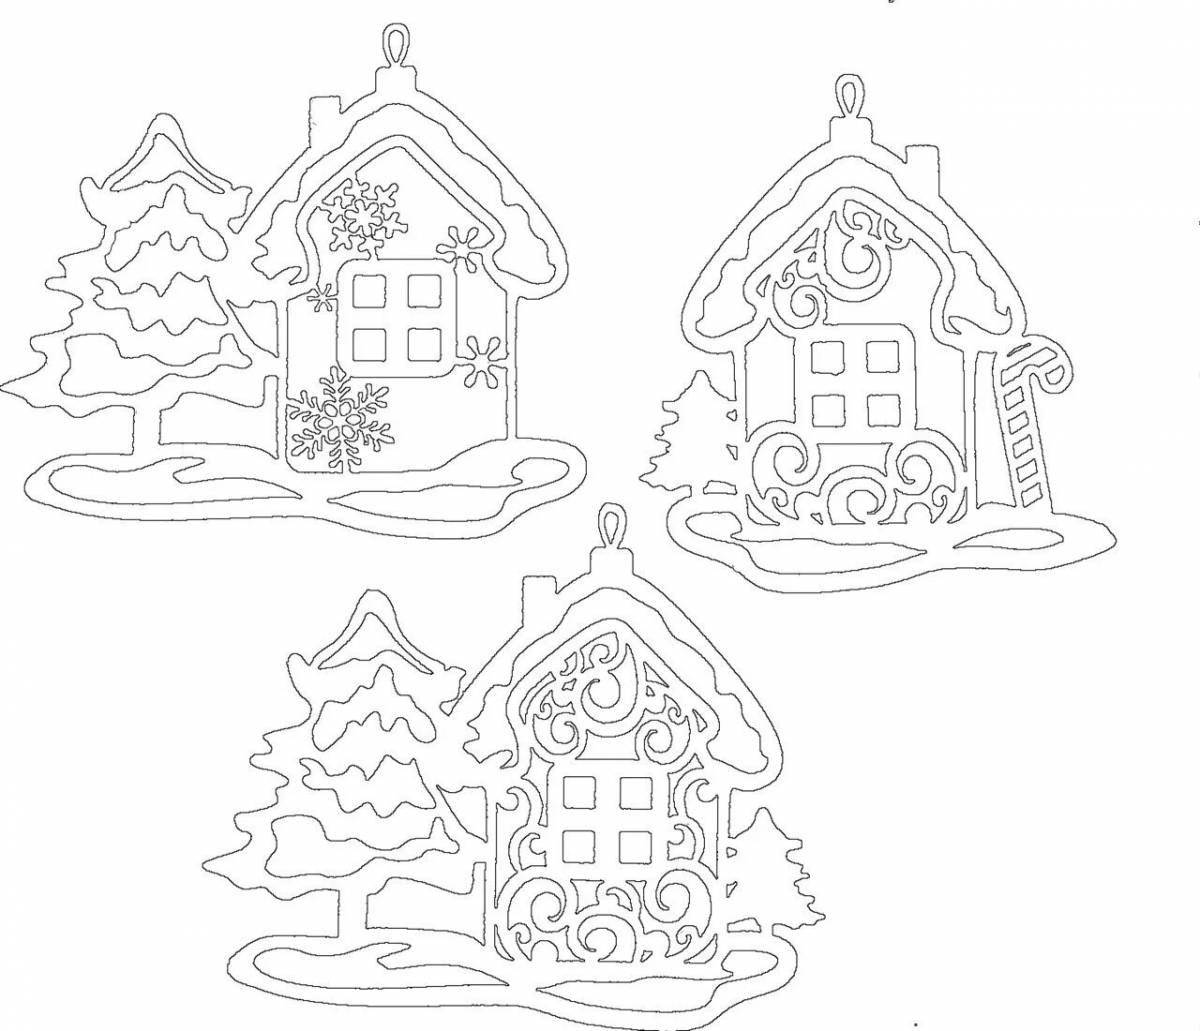 Coloring page glorious bast hut